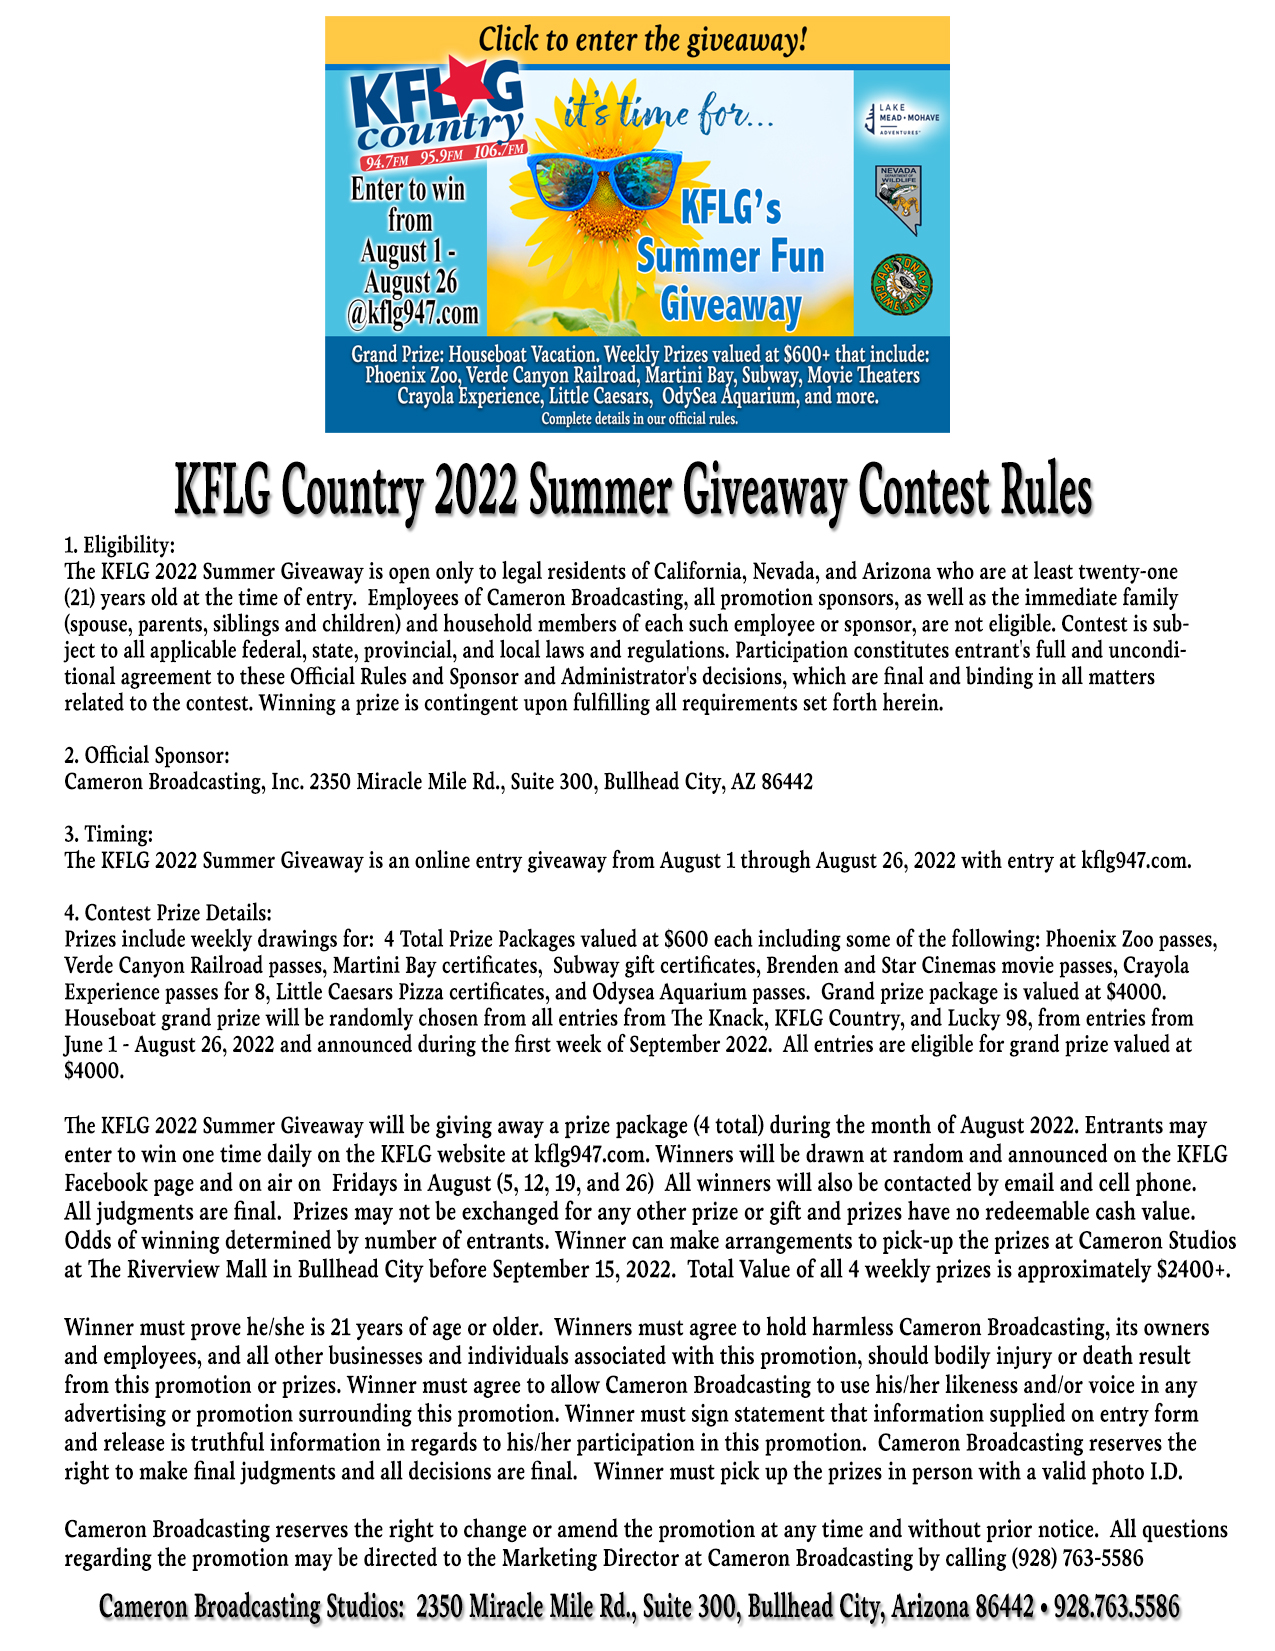 KFLG Country 2022 Summer Giveaway Contest Rules